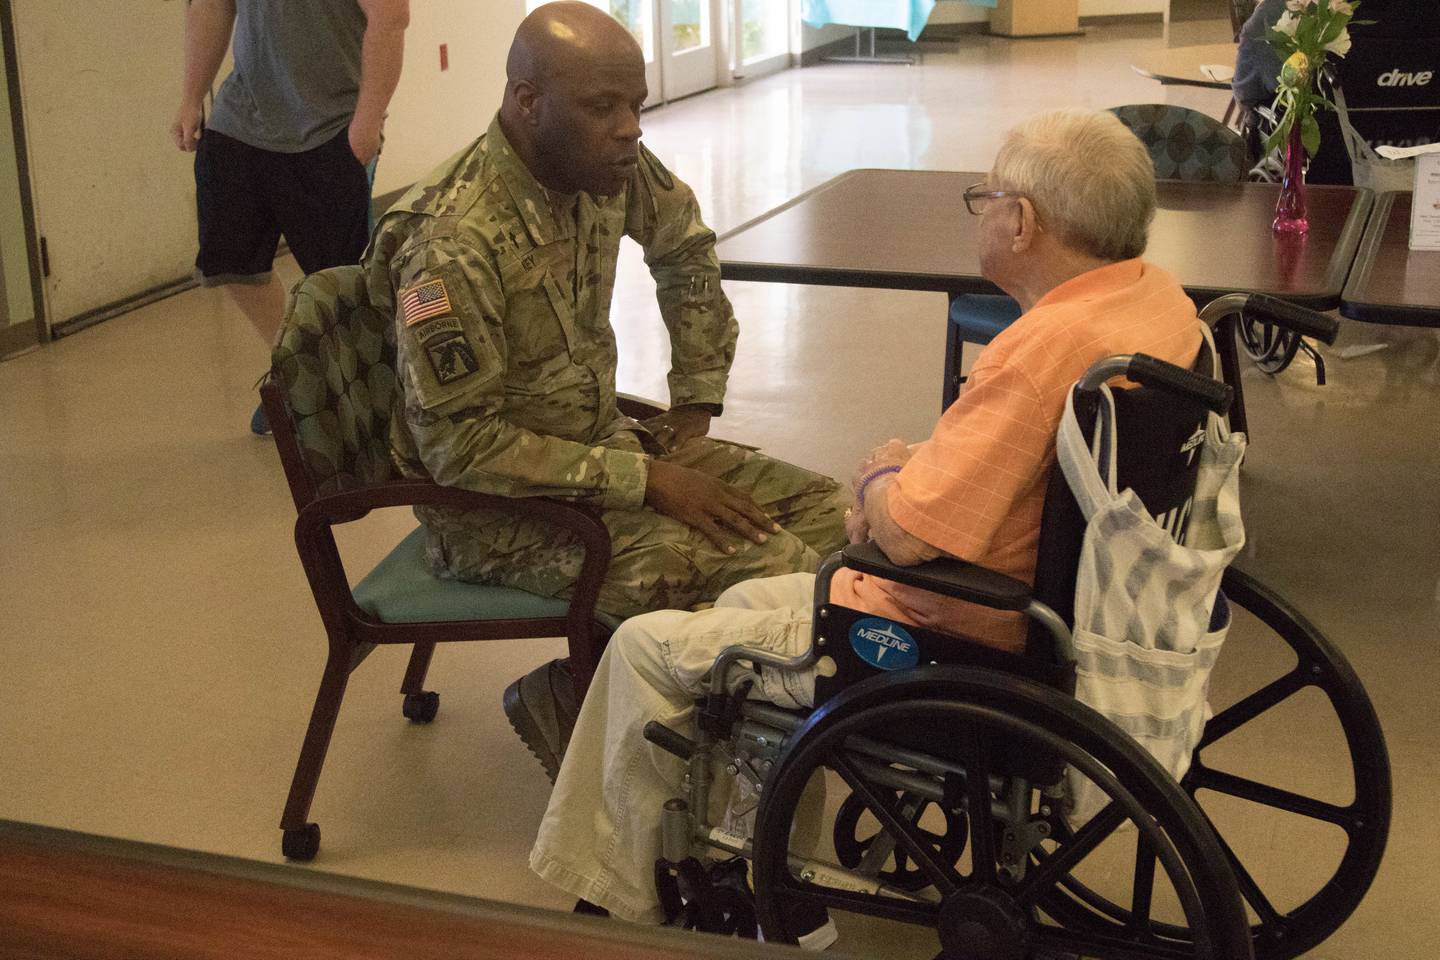 Army Lt. Col. James Key speaks with an Air Force veteran from the Veterans Home in Barstow, California, during a Veterans Home volunteer event in 2019.